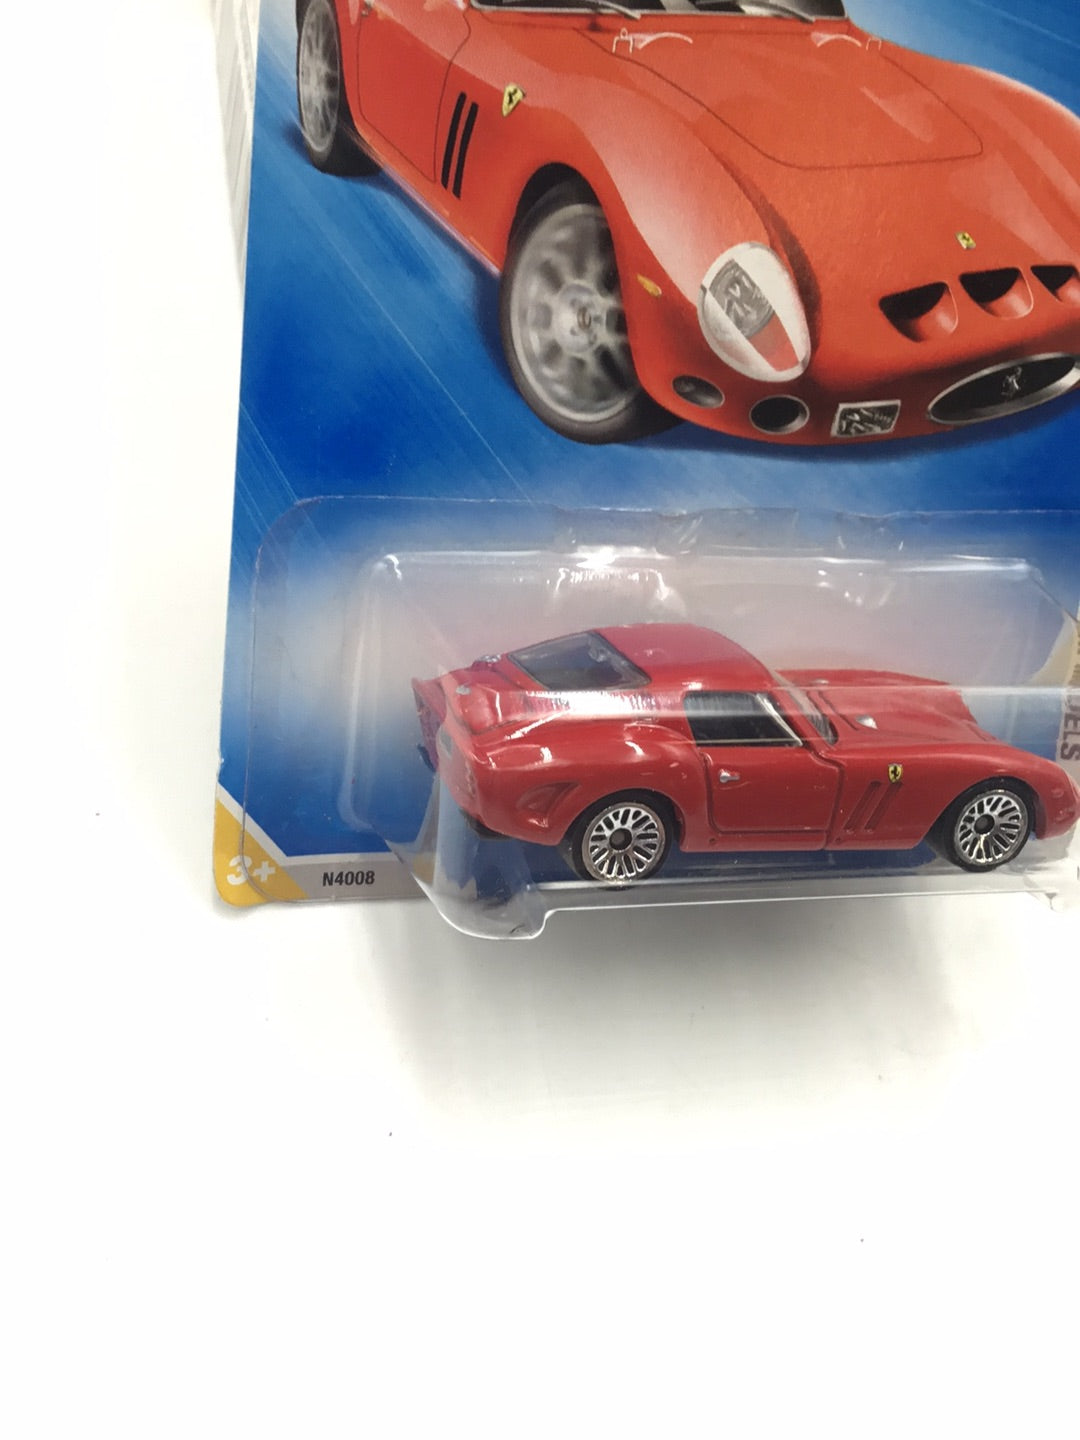 2009 Hot Wheels #5 Ferrari 250 GTO red with protector